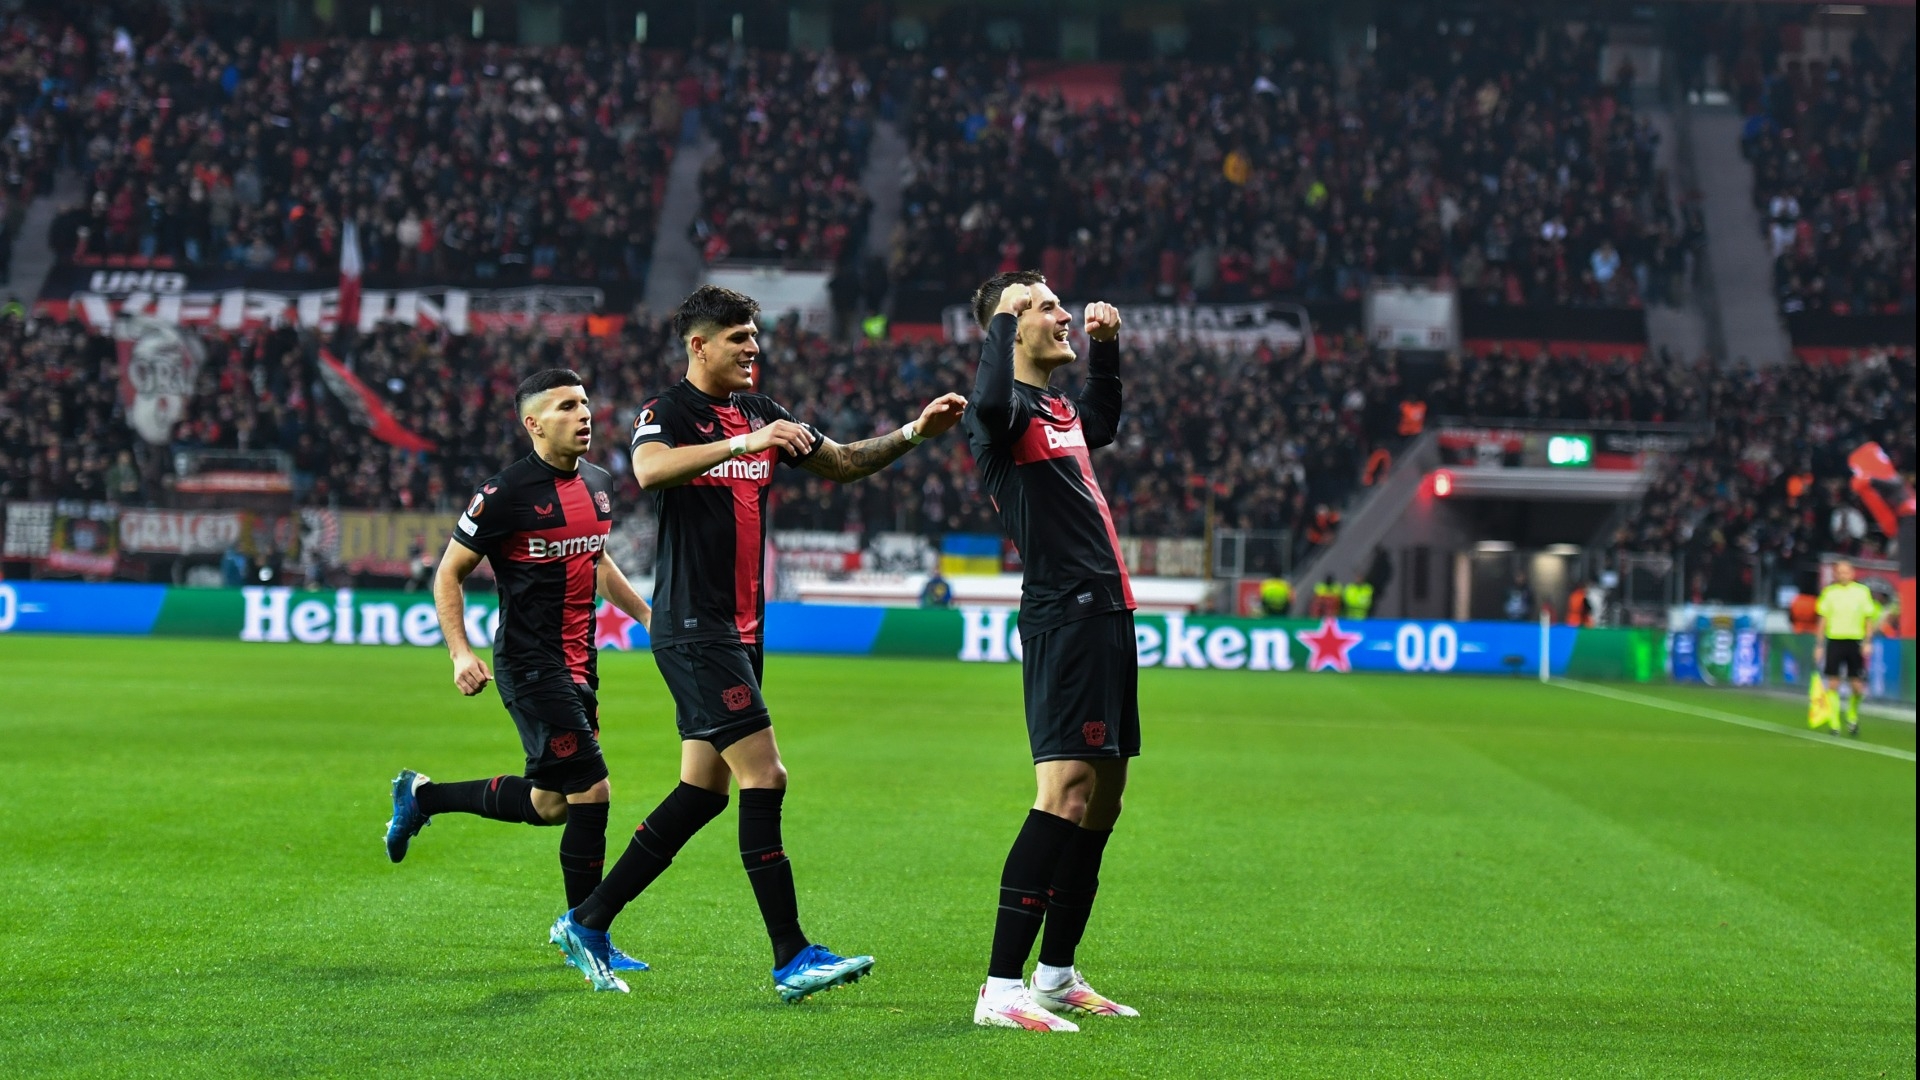 Werkself complete perfect group stage with 5-1 win over Molde | Group stage UEL